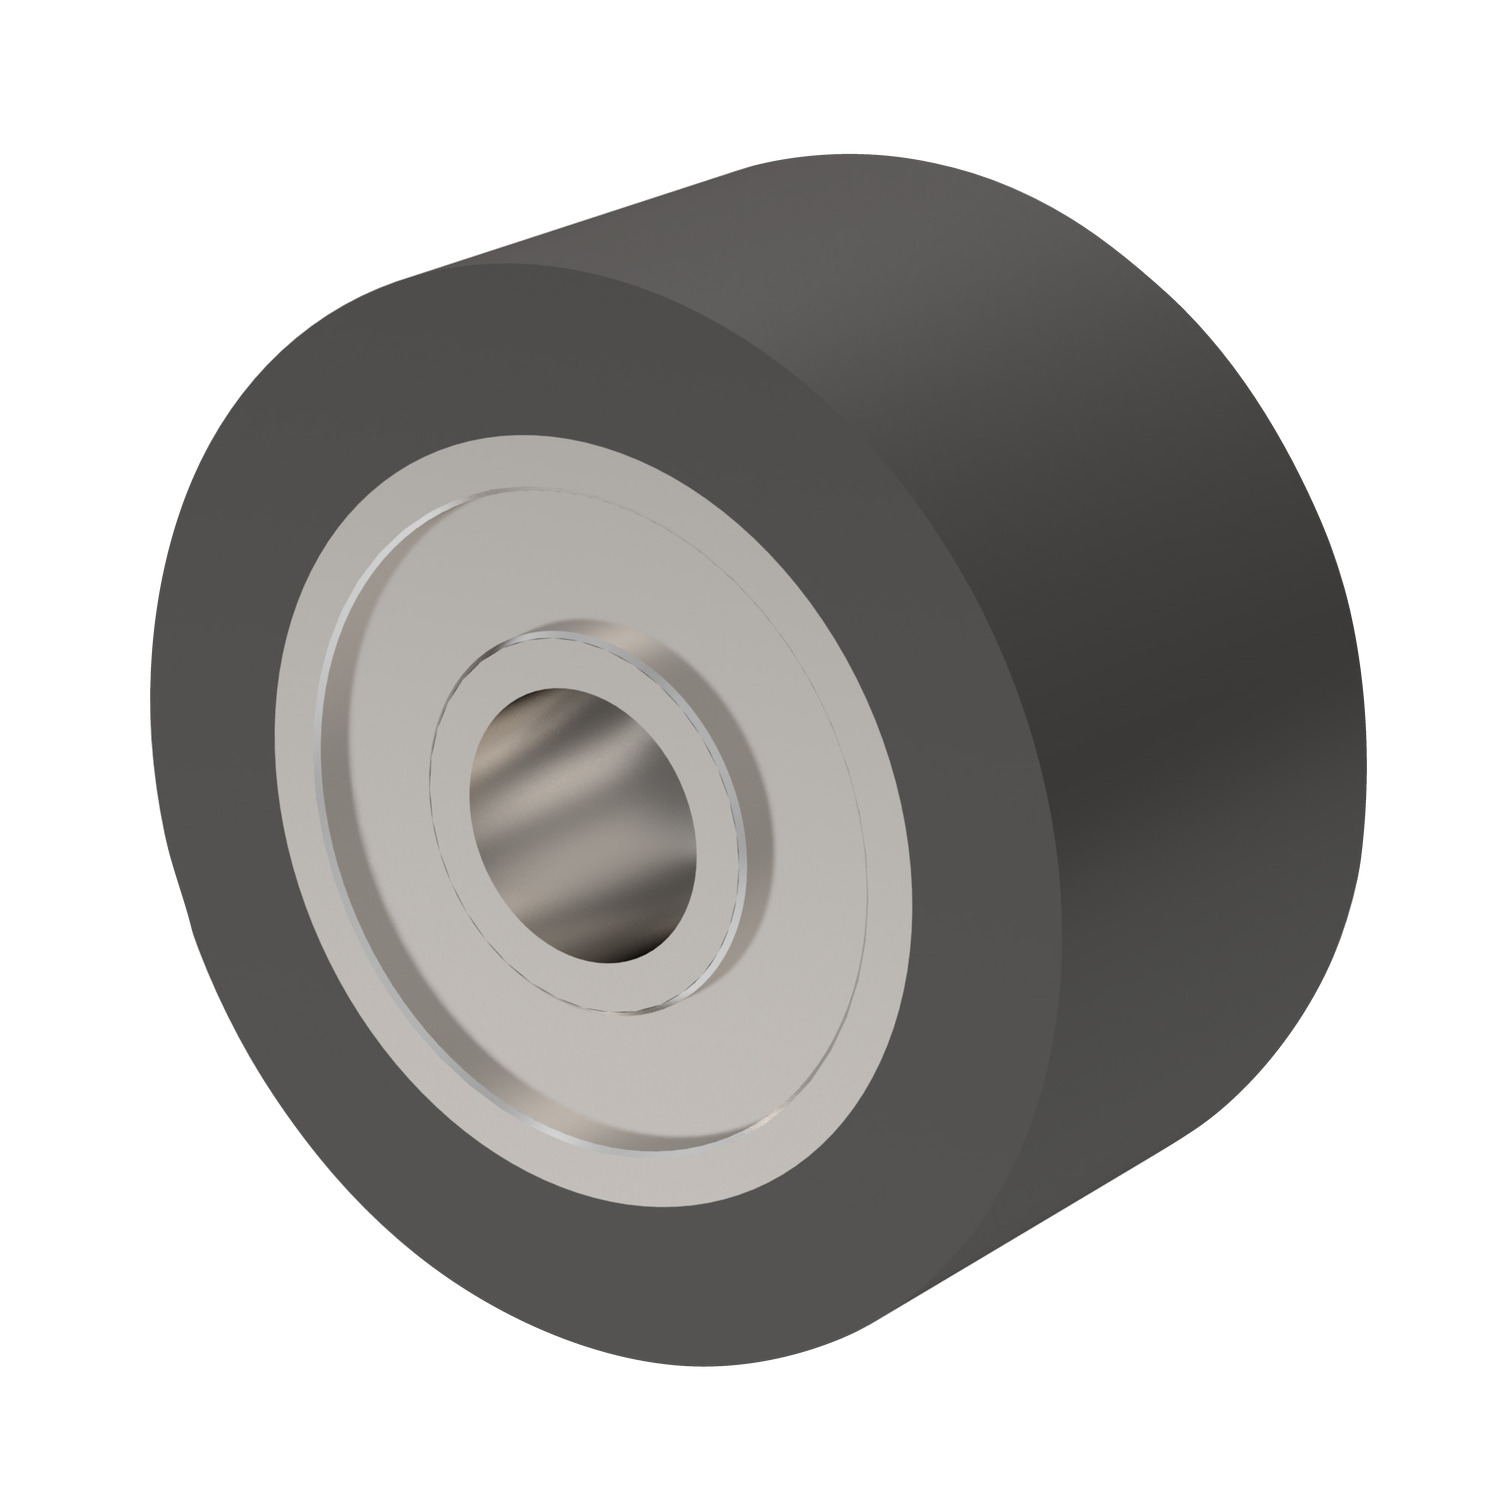 60610.W1033 Urethane Double Bearing 9mm 2RS x 35mm DIA x 14mm WD, Duro = 35